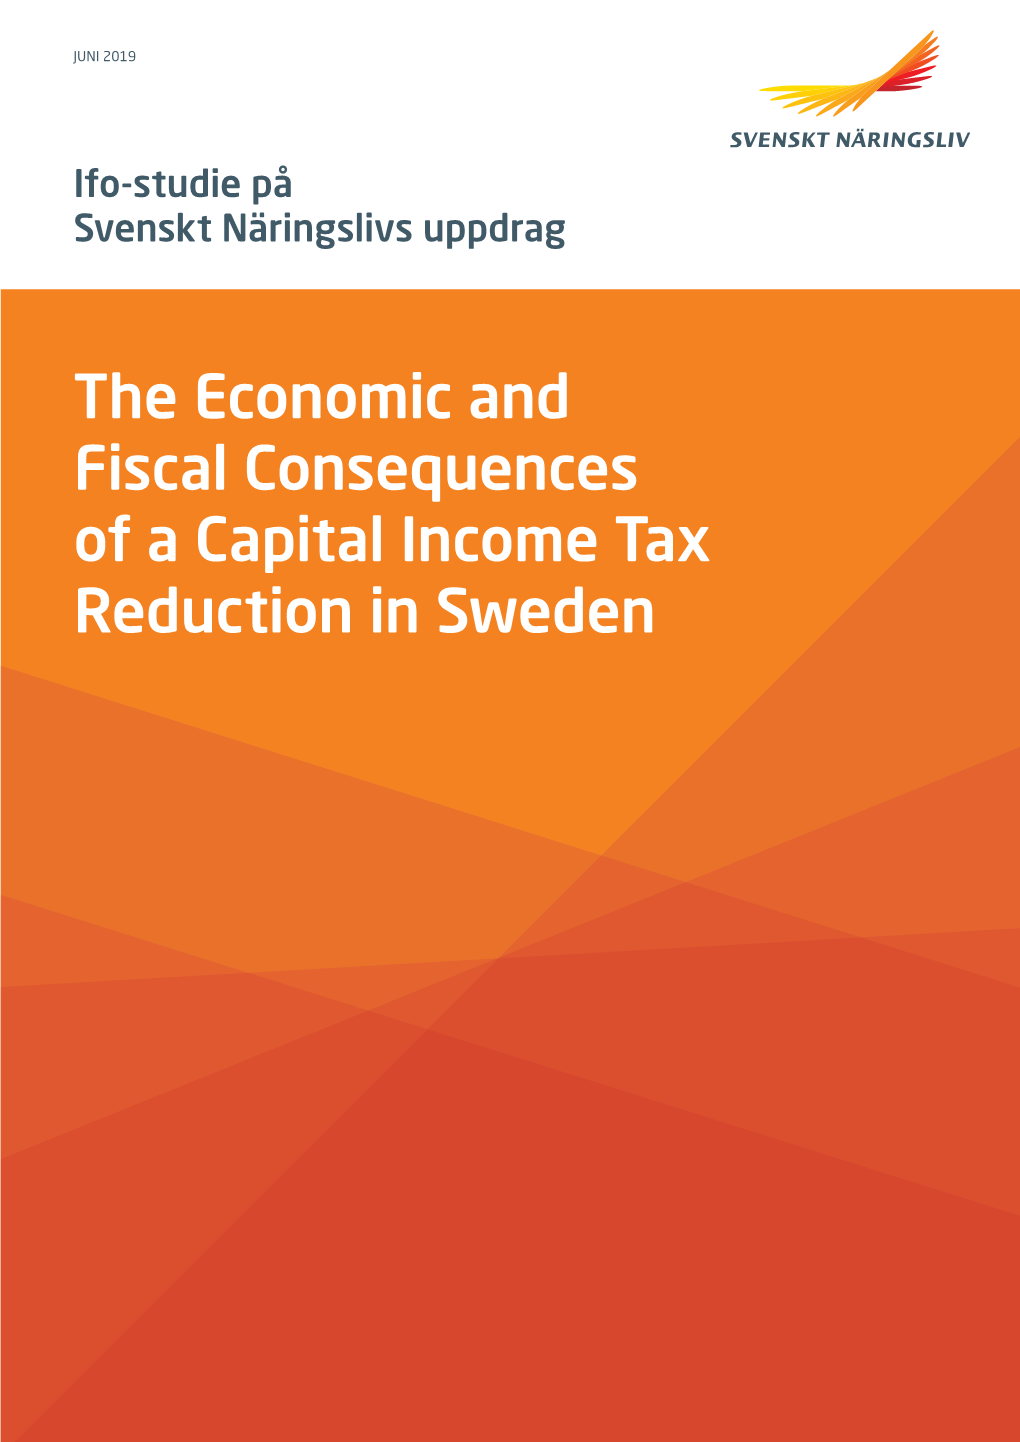 The Economic and Fiscal Consequences of a Capital Income Tax Reduction in Sweden Prof